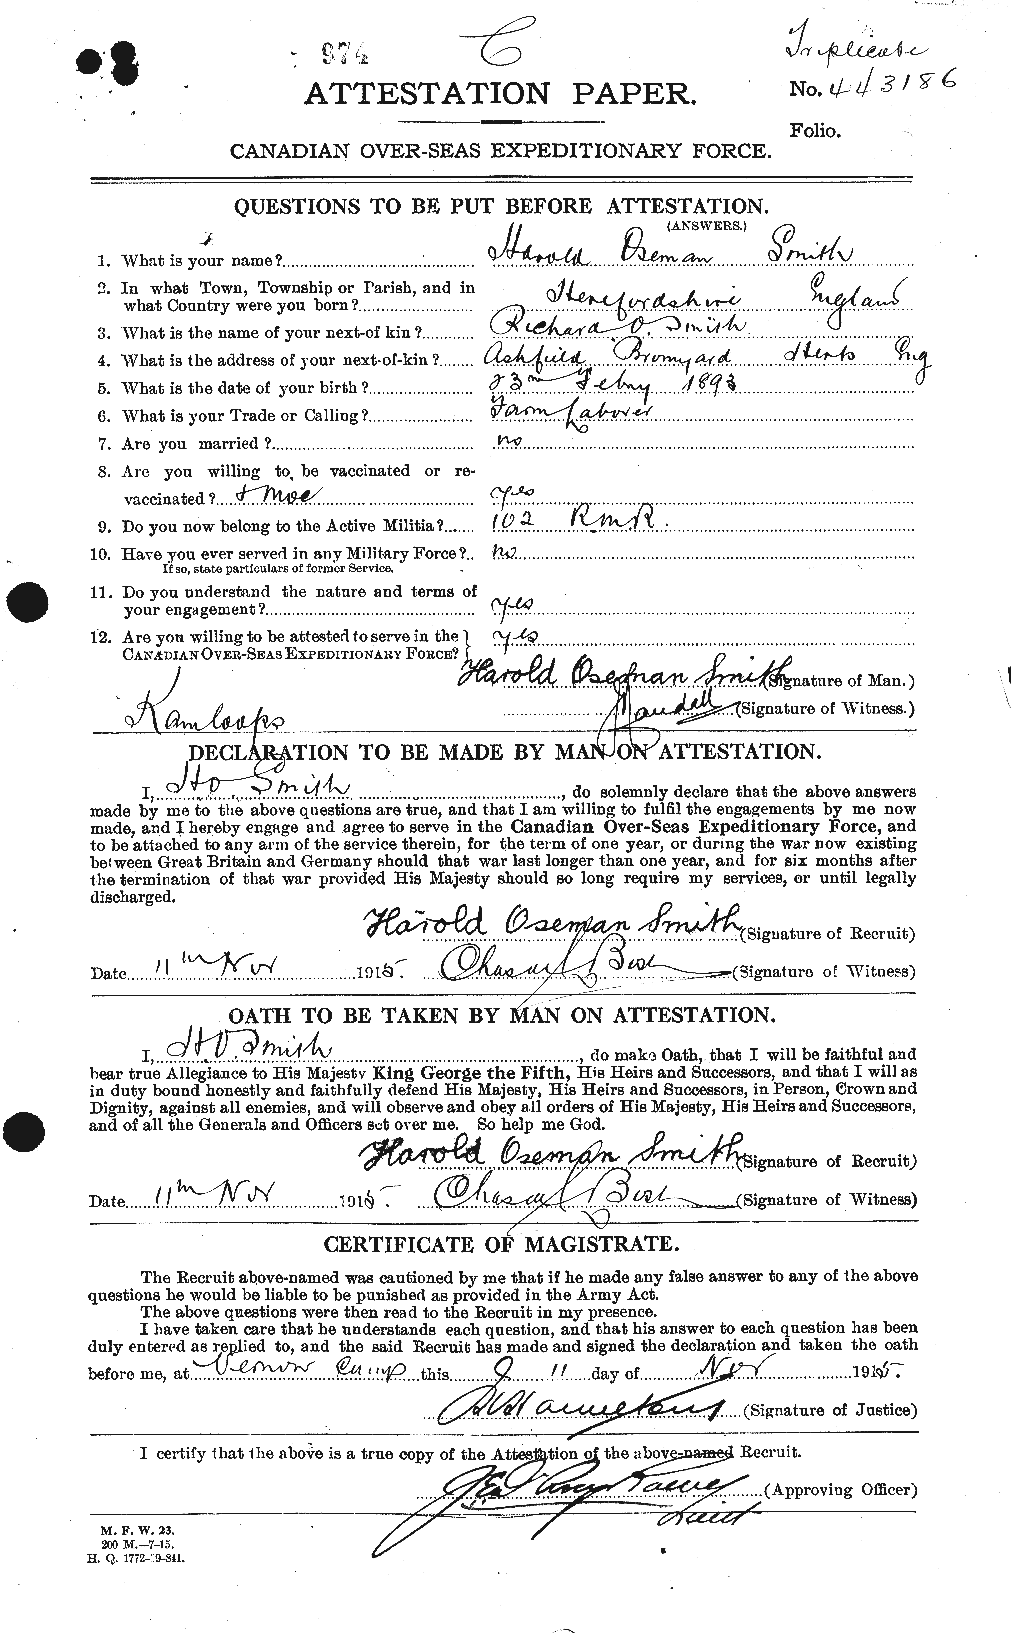 Personnel Records of the First World War - CEF 106195a